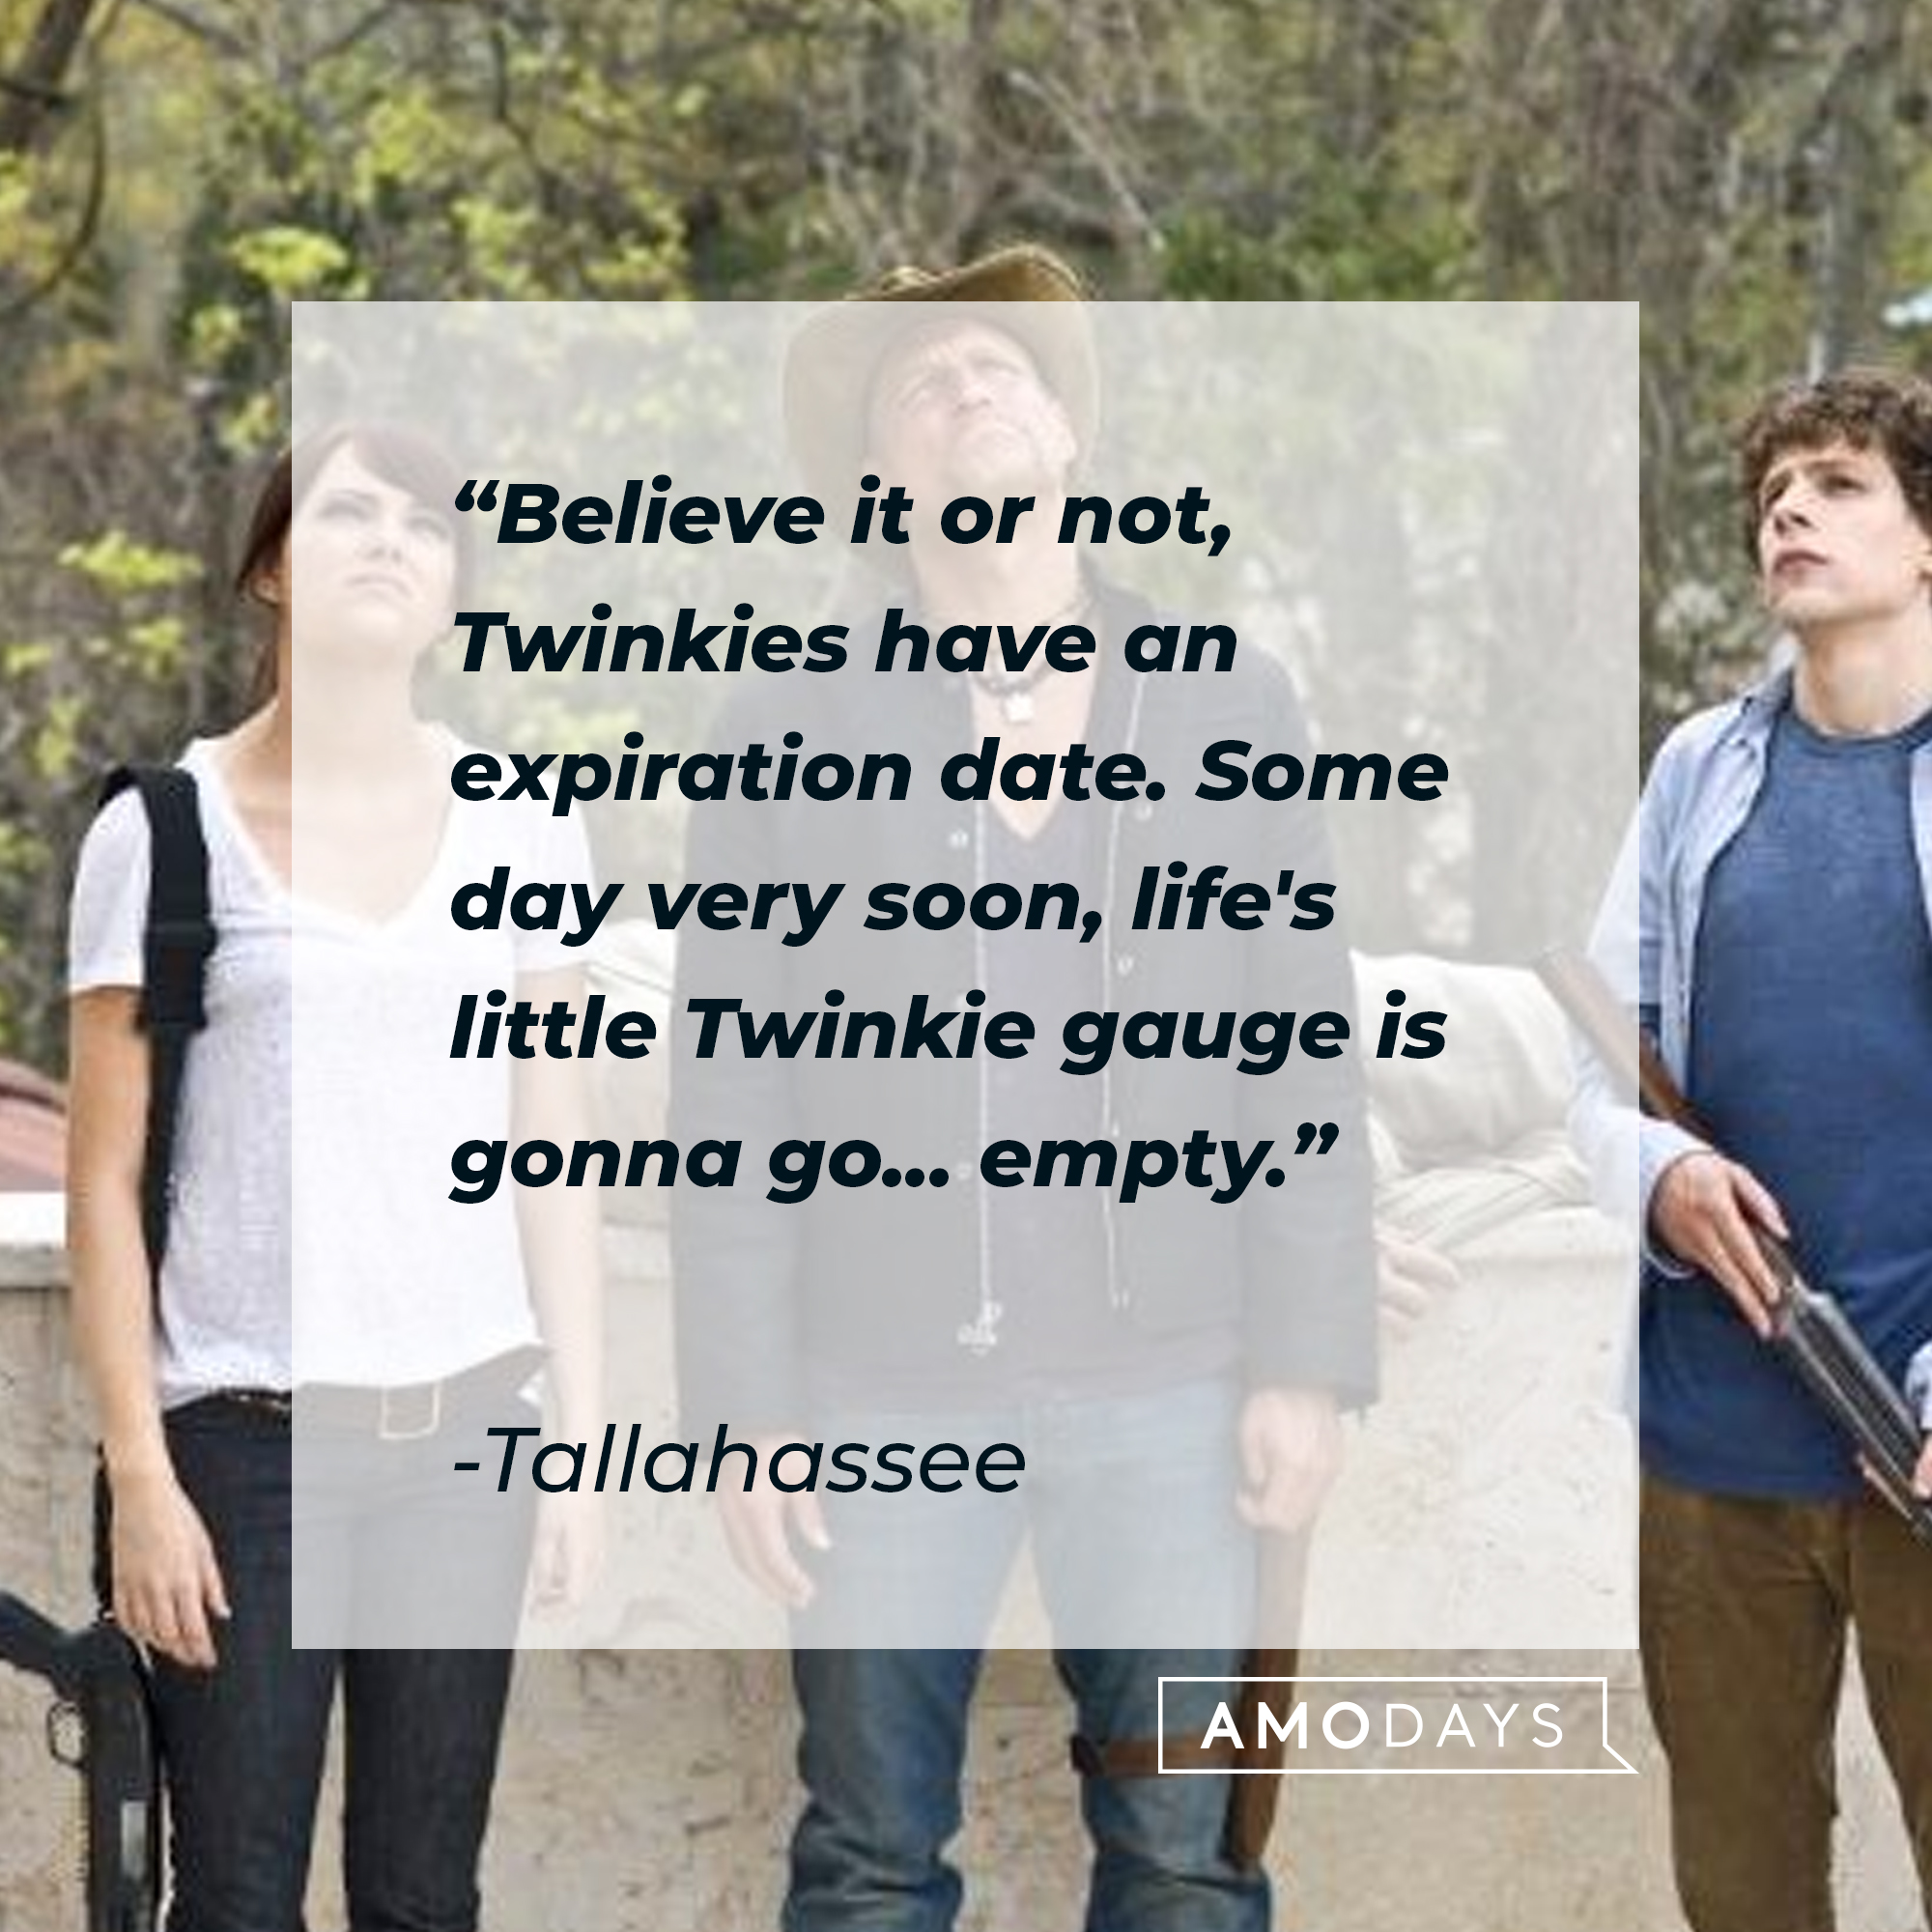 Tallahassee's quote: "Believe it or not, Twinkies have an expiration date. Some day very soon, life's little Twinkie gauge is gonna go... empty." | Source: Facebook.com/Zombieland